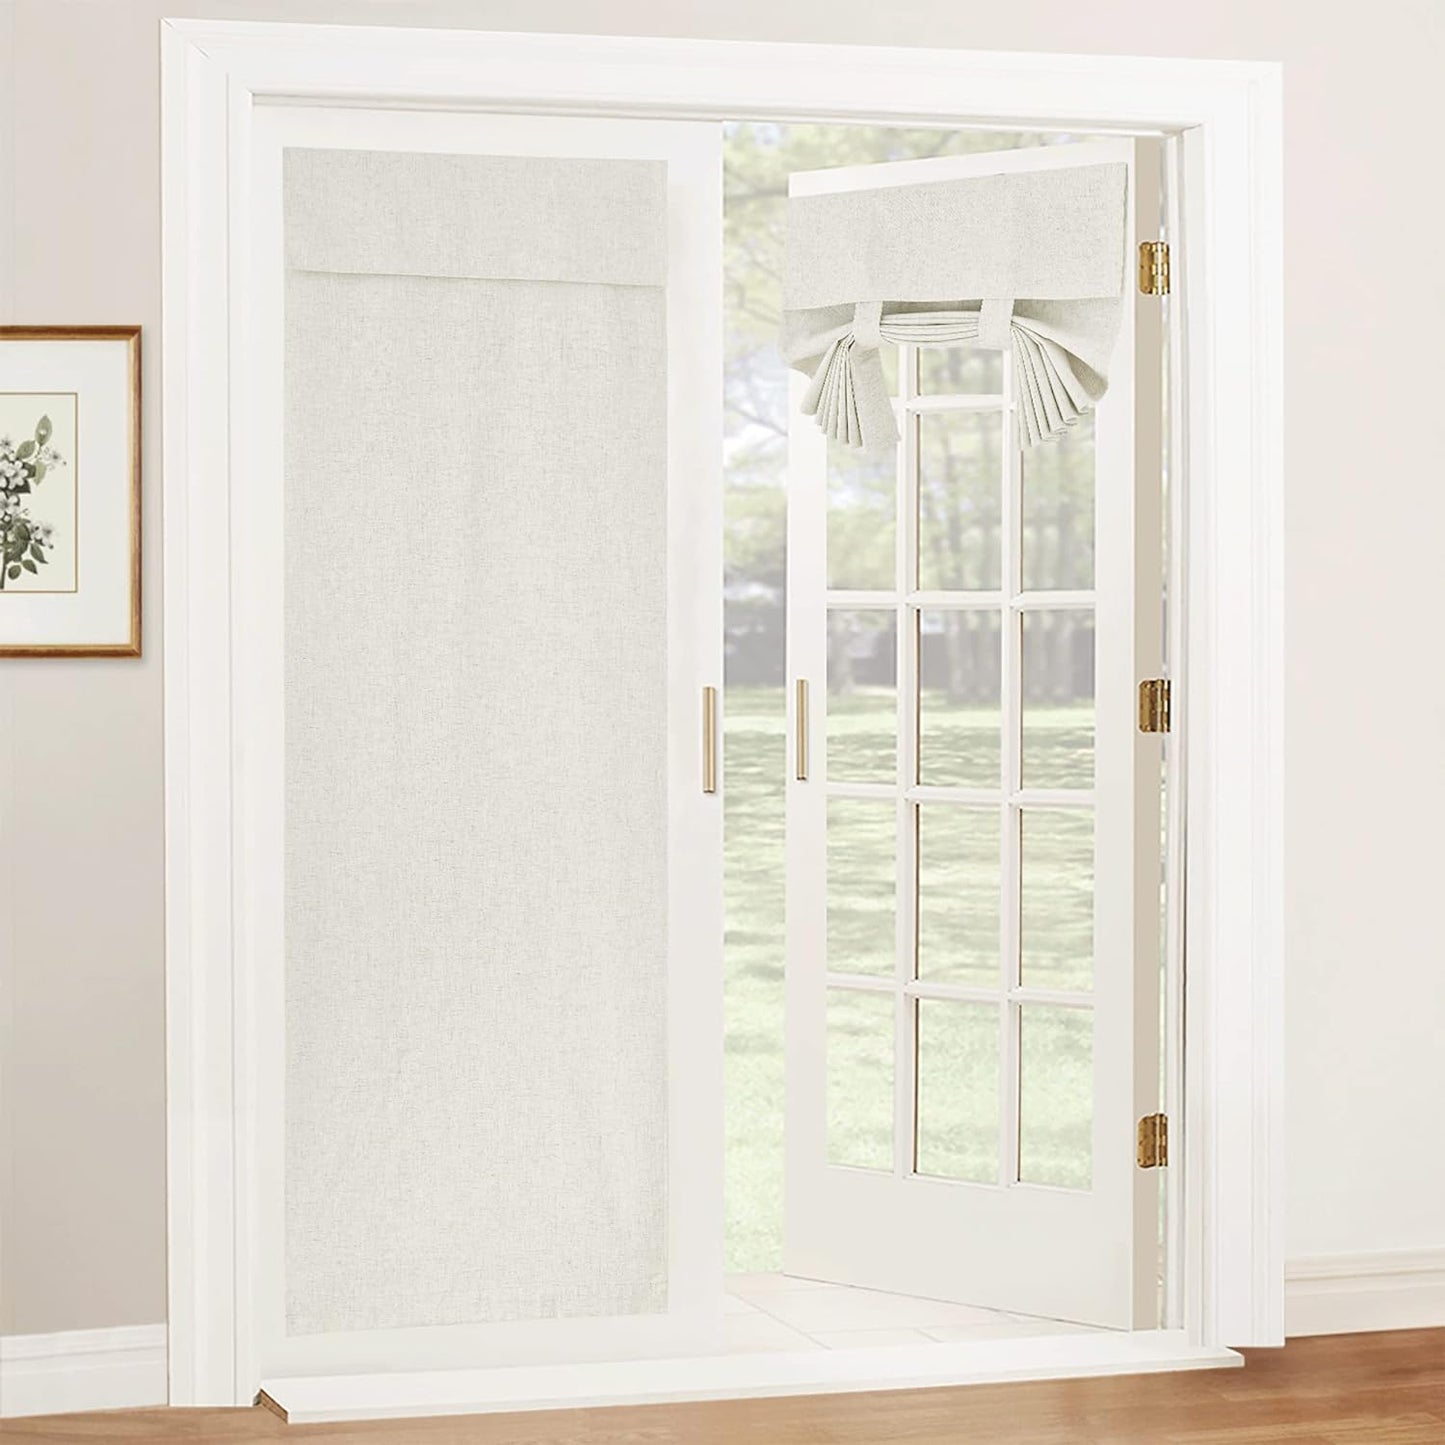 RYB HOME Blackout French Door Curtains, Room Darkening Shades Small Door Window Curtains and Drapes Thermal Insulated Tricia Door Blinds for Patio Door Doorway, W26 X L40 Inch, 1 Panel, Gray  RYB HOME Linen 26" X 80" 